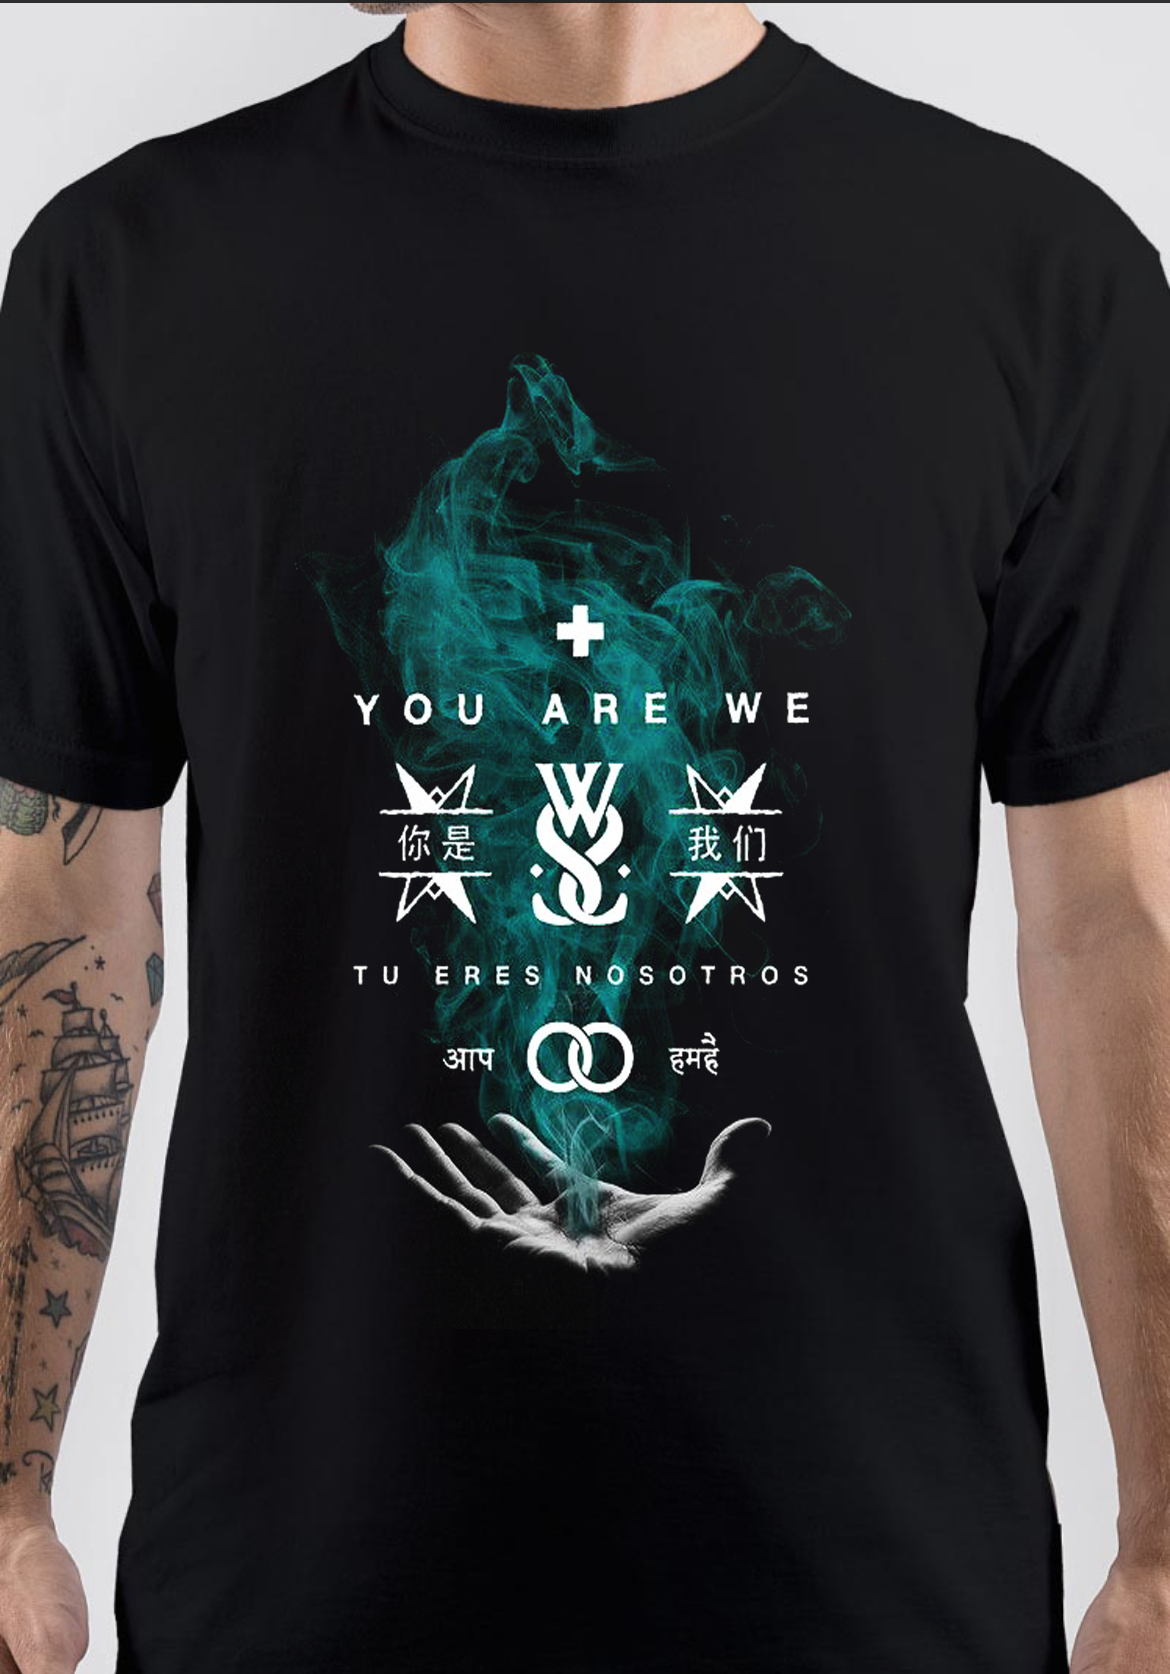 While She Sleeps T-Shirt And Merchandise